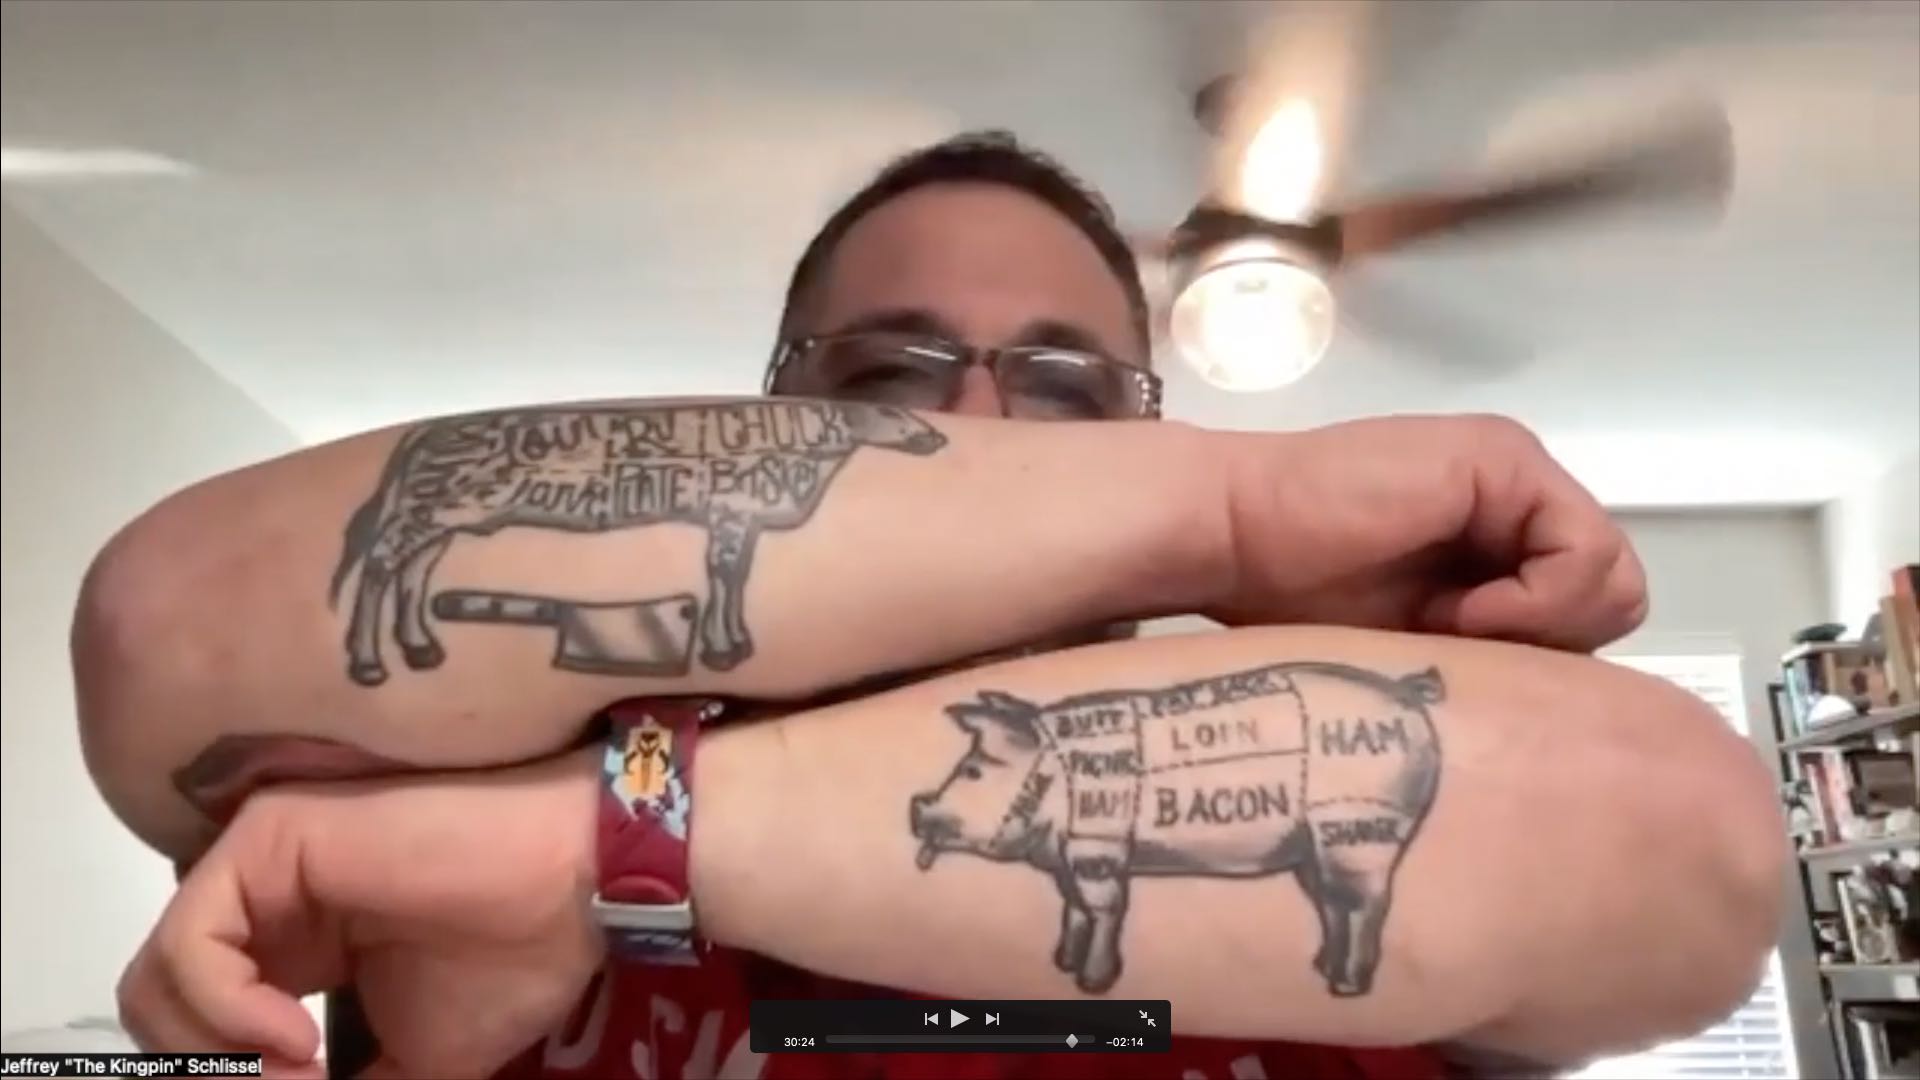 Chef Schissel showing his tatted forearms